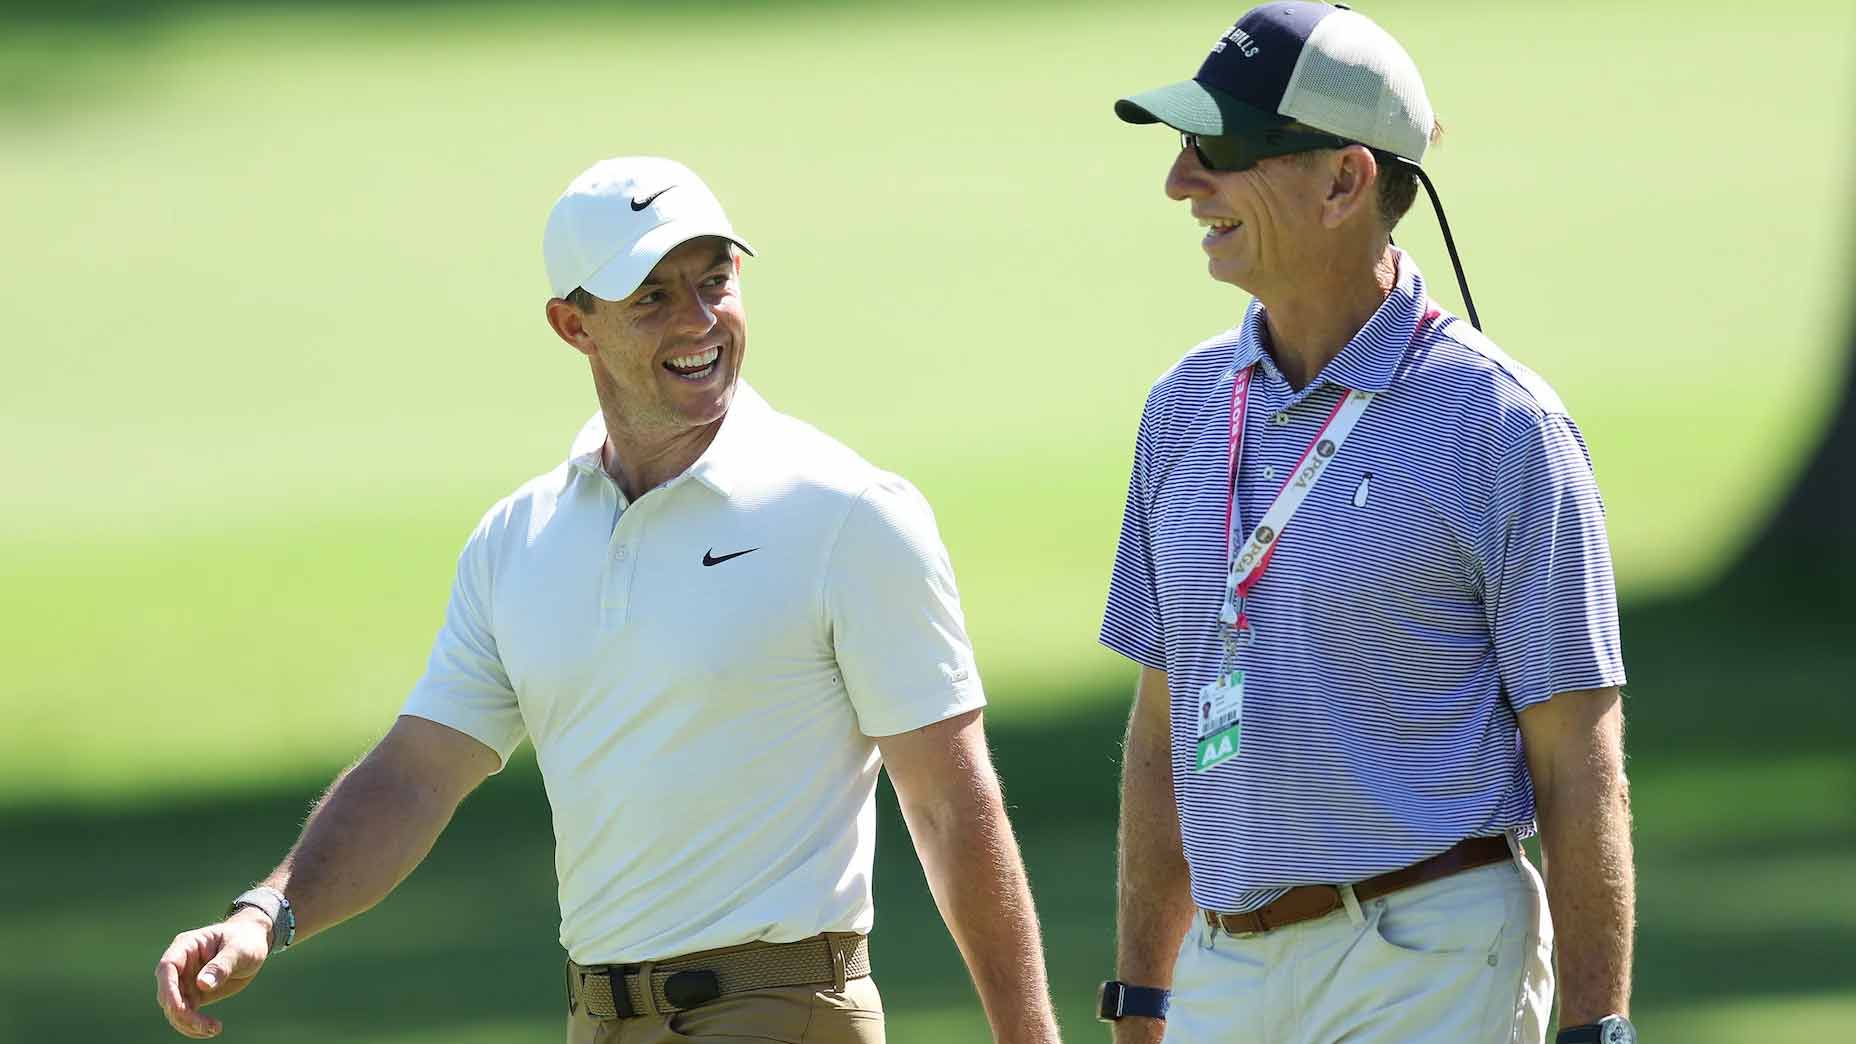 Rory McIlroy walks with coach at 2022 U.S. Open